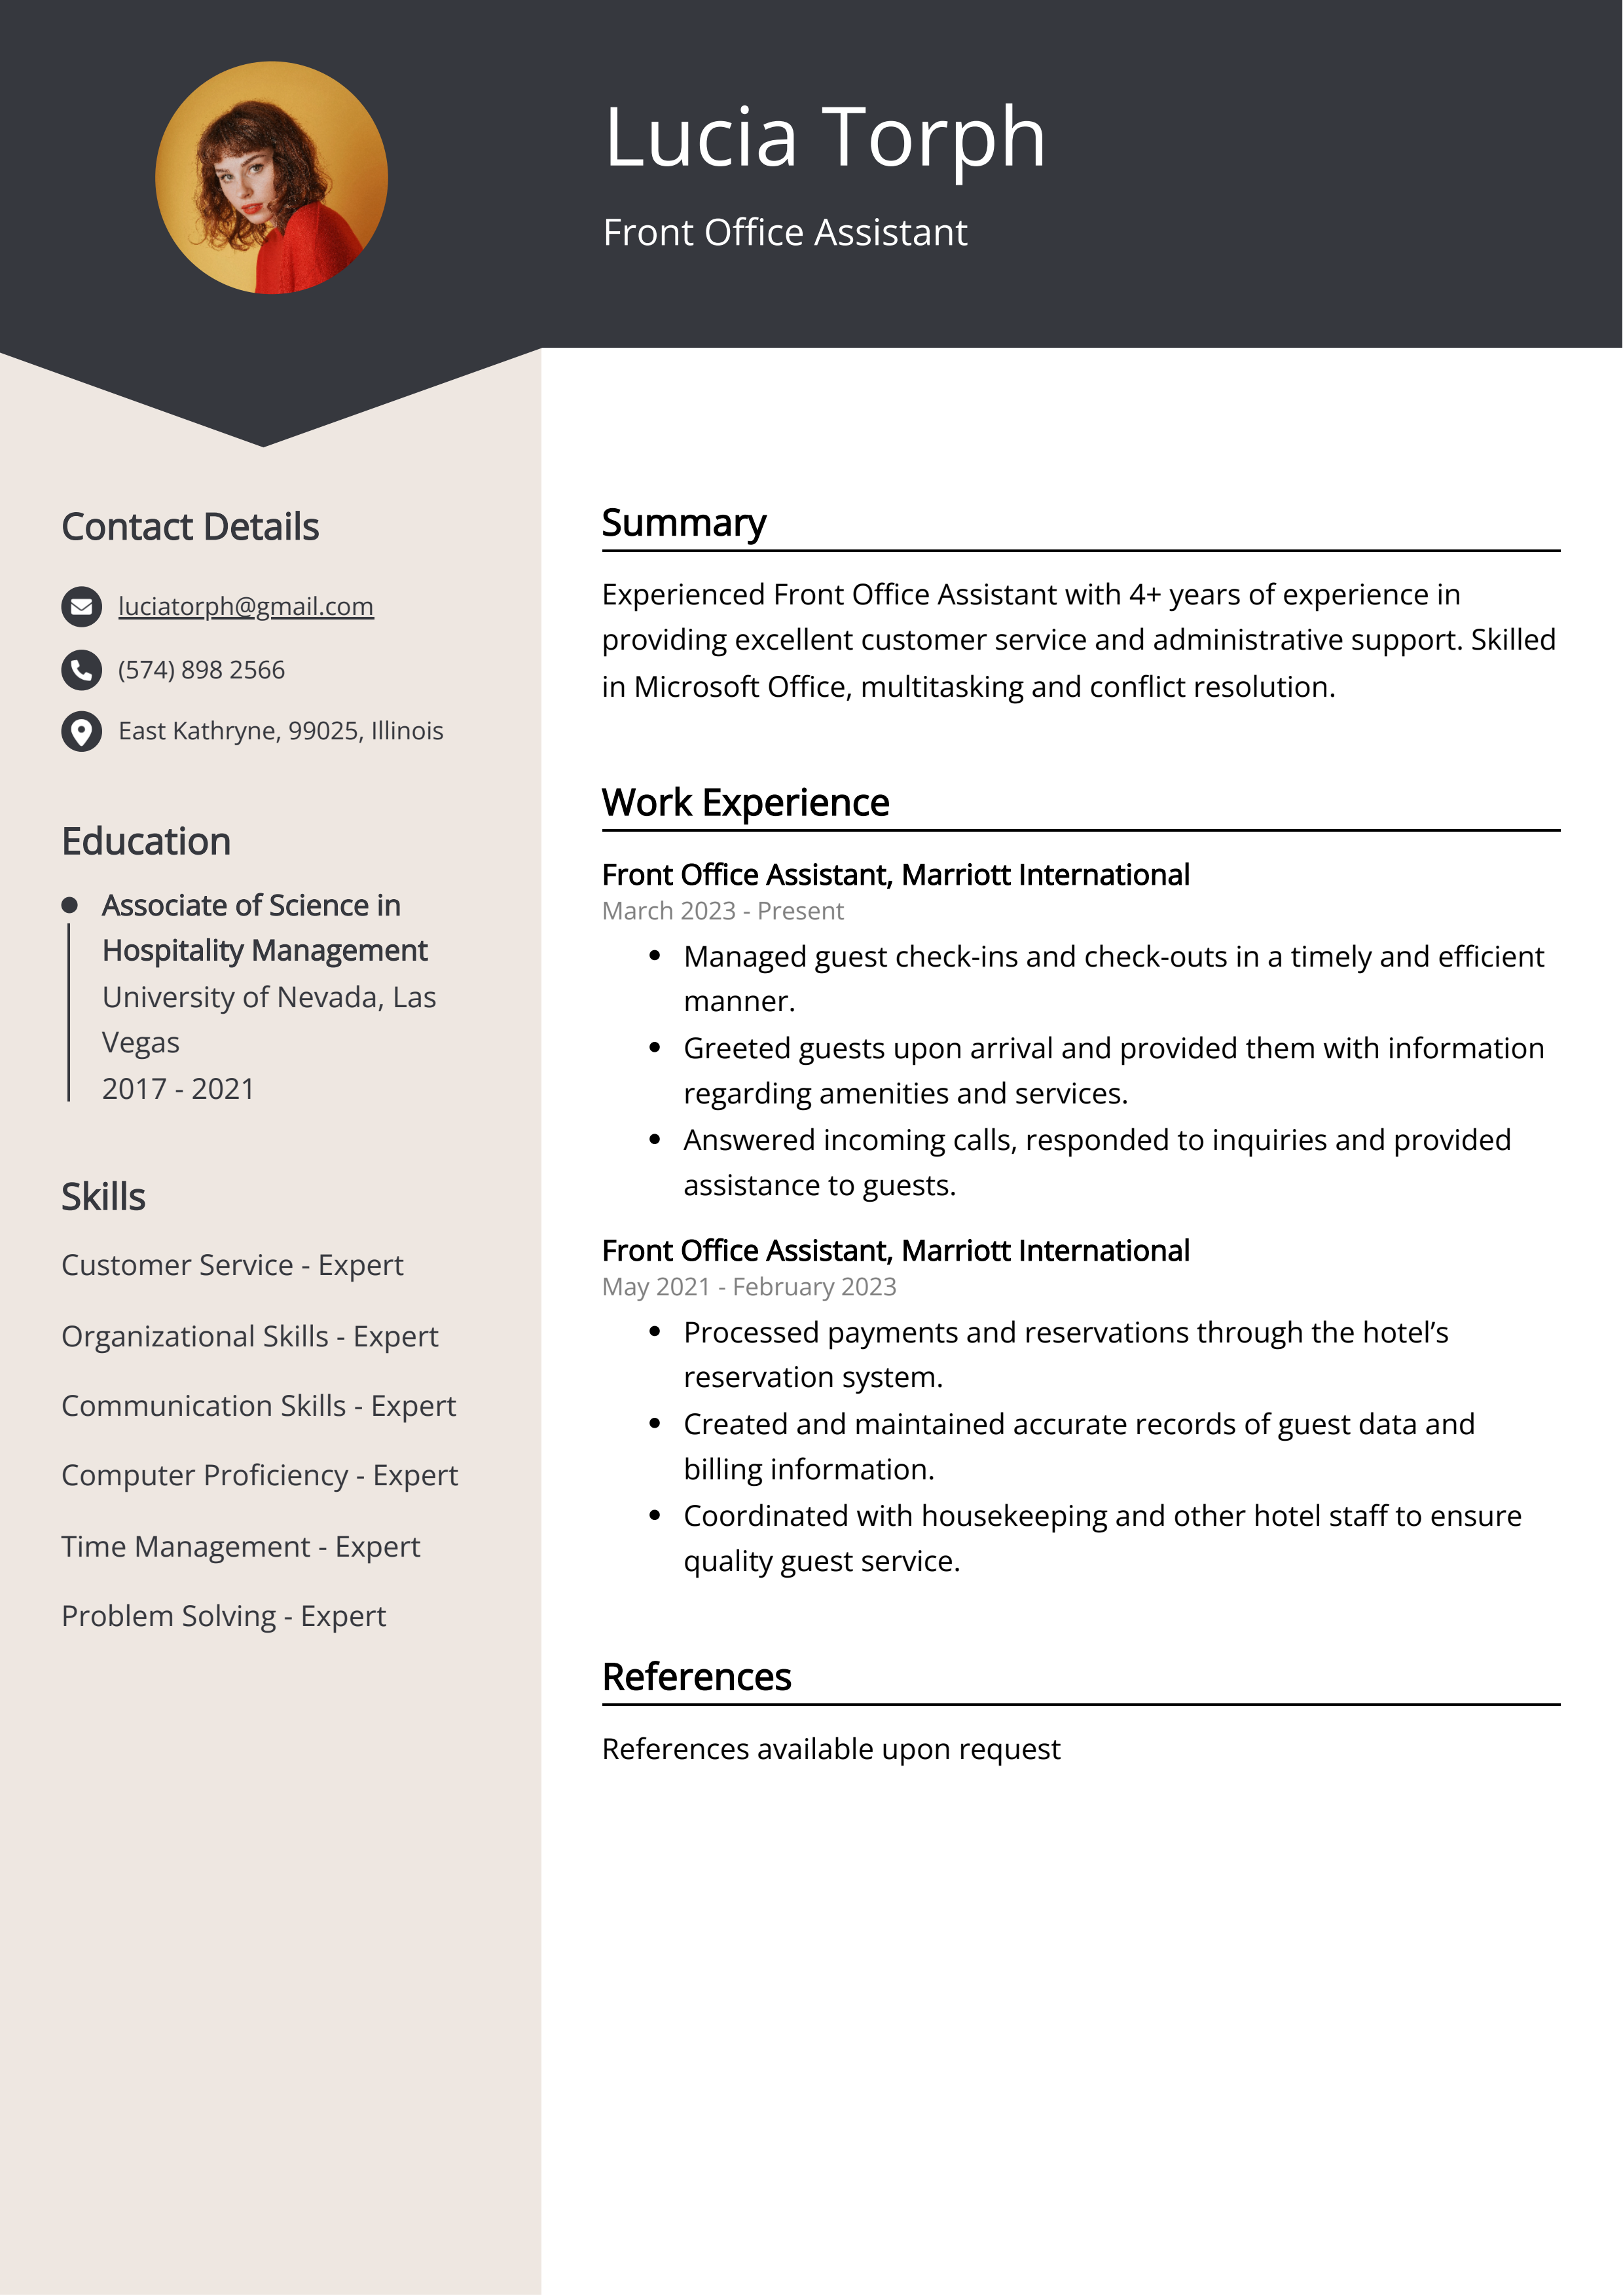 Front Office Assistant CV Example